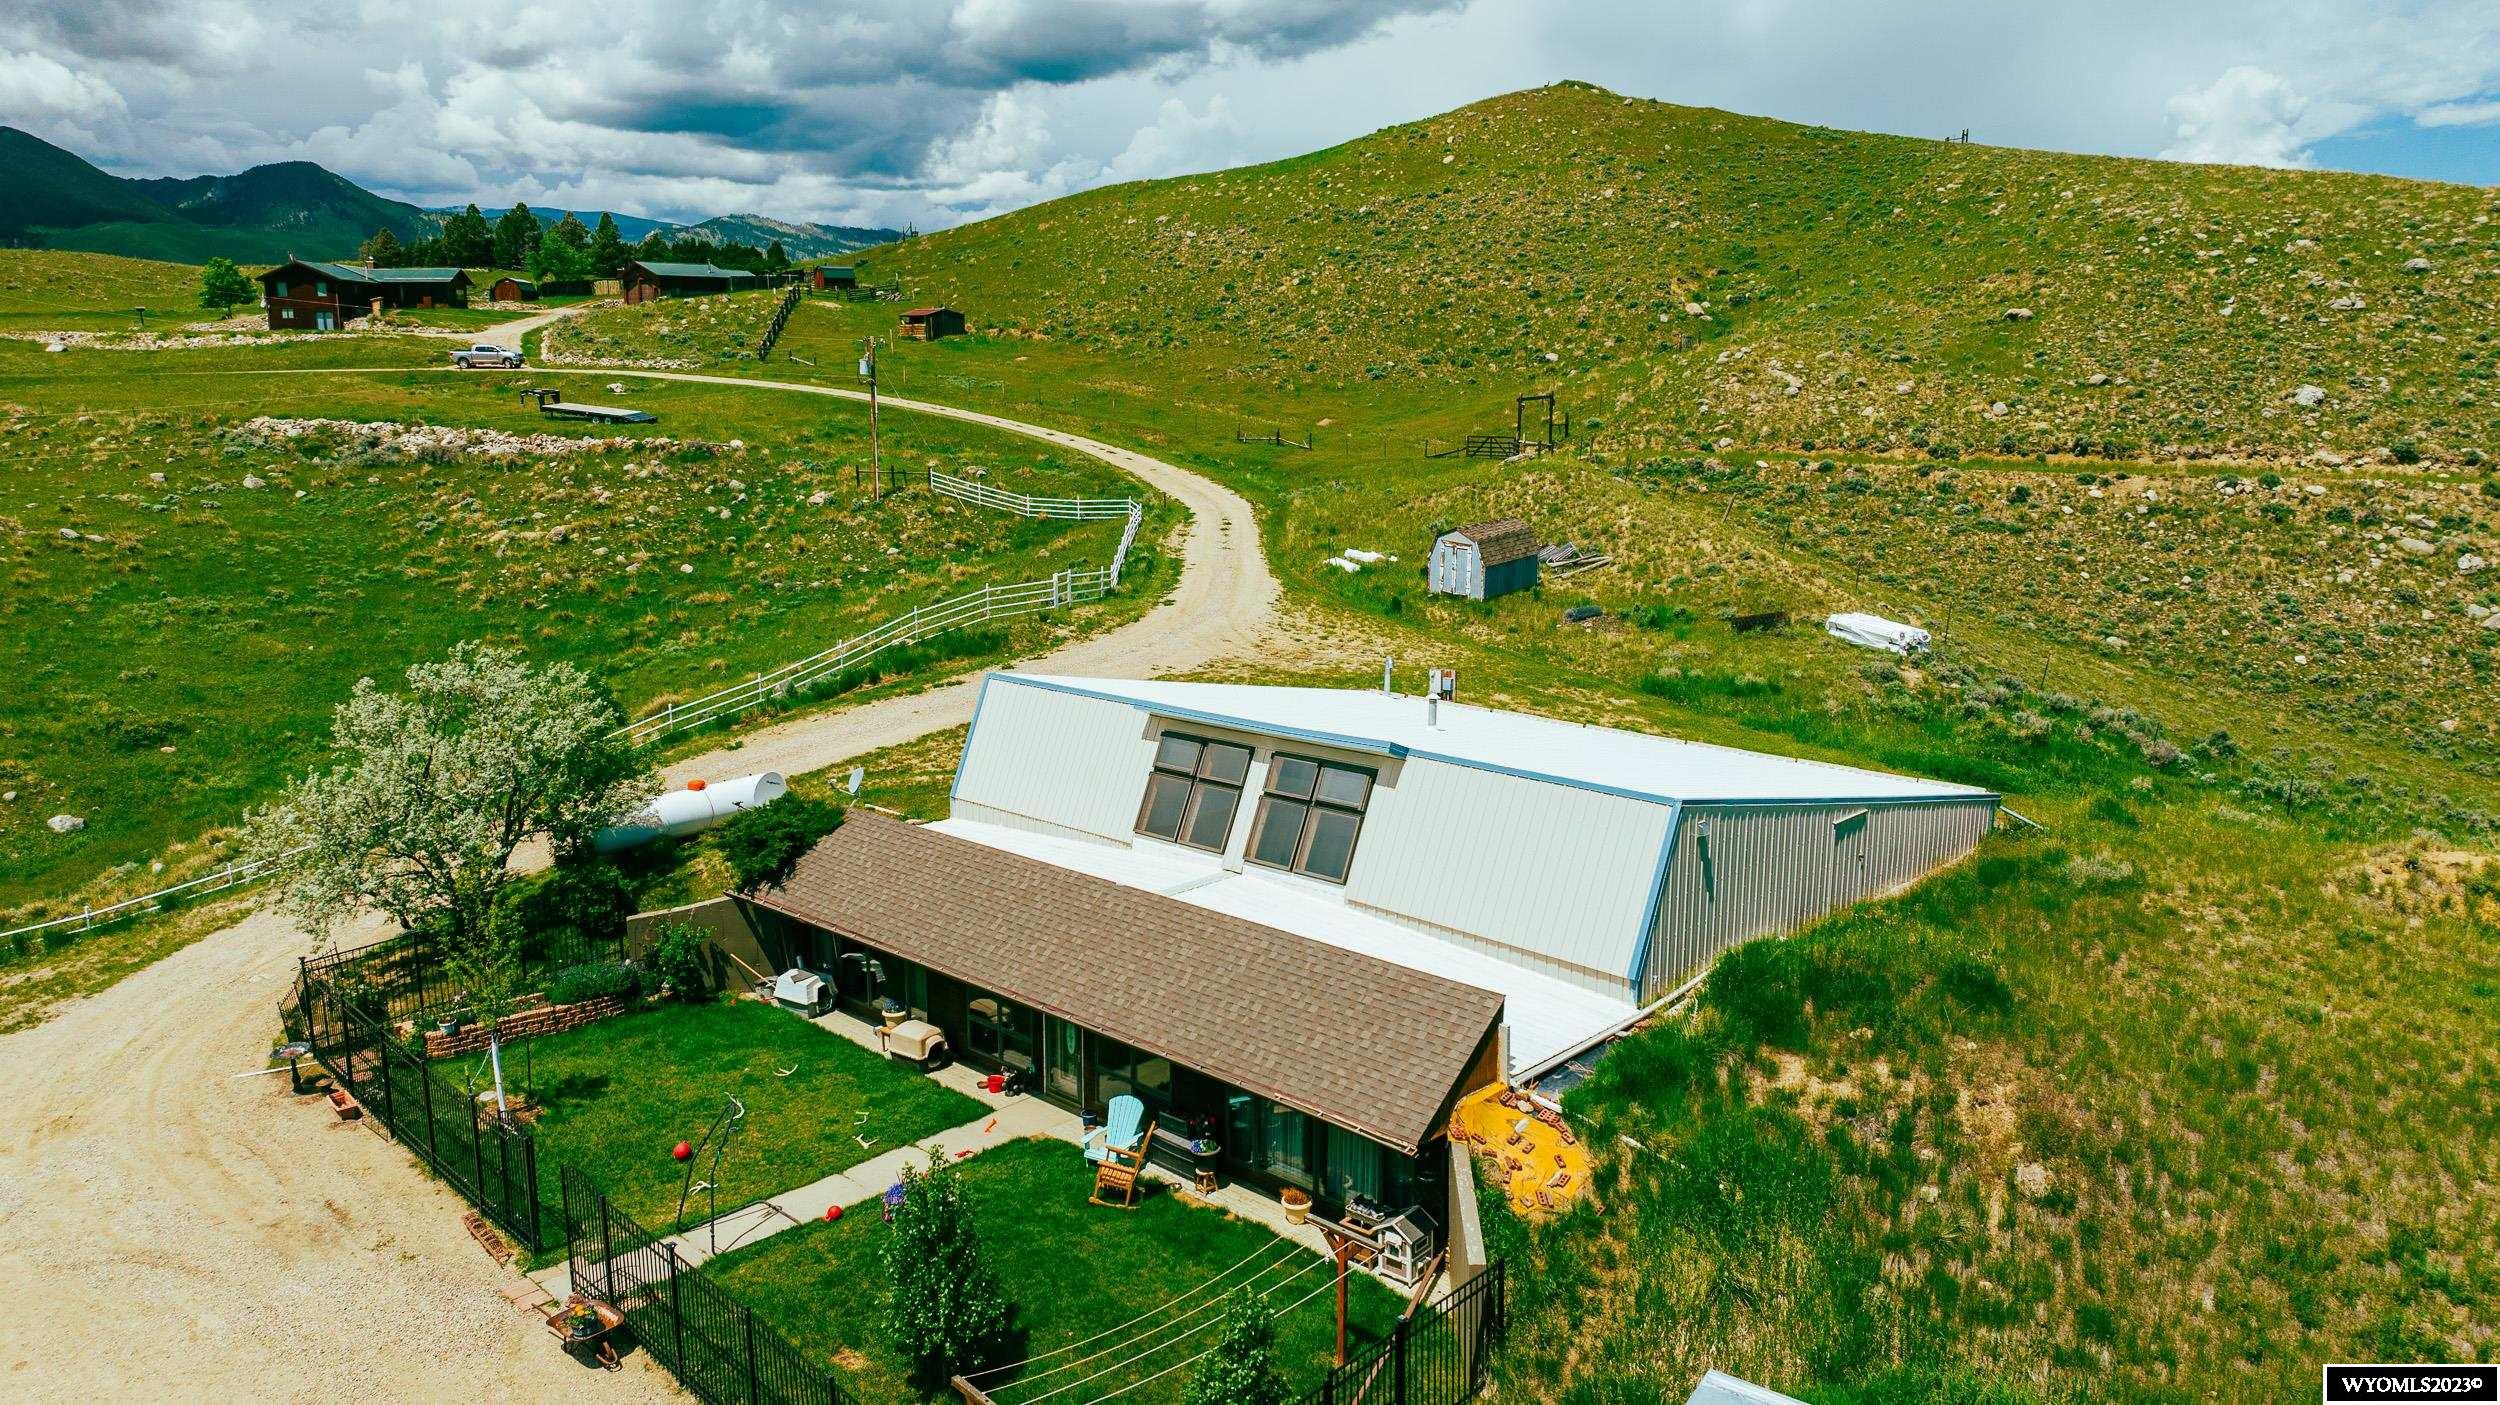 Beautiful solar home w/ app. 3132 sq. ft. of living space in the country with breath taking views of the Bighorn Mountains & valleys.  This home has 3 bedrooms & 1.5 baths. Large master bedroom suite w/ a 1/2 bath but the drain is there to add a shower if you wish. Large sun room to grow your vegetables & plants. Large spacious kitchen w/dining area. Formal living room, separate office or family room area. Utilities run next to nothing due to the solar design. Access to 3000 plus square ft. of storage above main floor of the home with outside access. Wrought iron fenced in yard in front that is well landscaped. Small reservoir on the property  below the house.  End of the road and private location.  Antique medicine cabinet in the master bath does not stay with the sale of the property.  Stop by and view this home with Cristy Kinghorn 307-620-0037  Seller would sell up to 138 acres separately for $5000 an acre. House and approximately 15.66 acres can be priced separately.